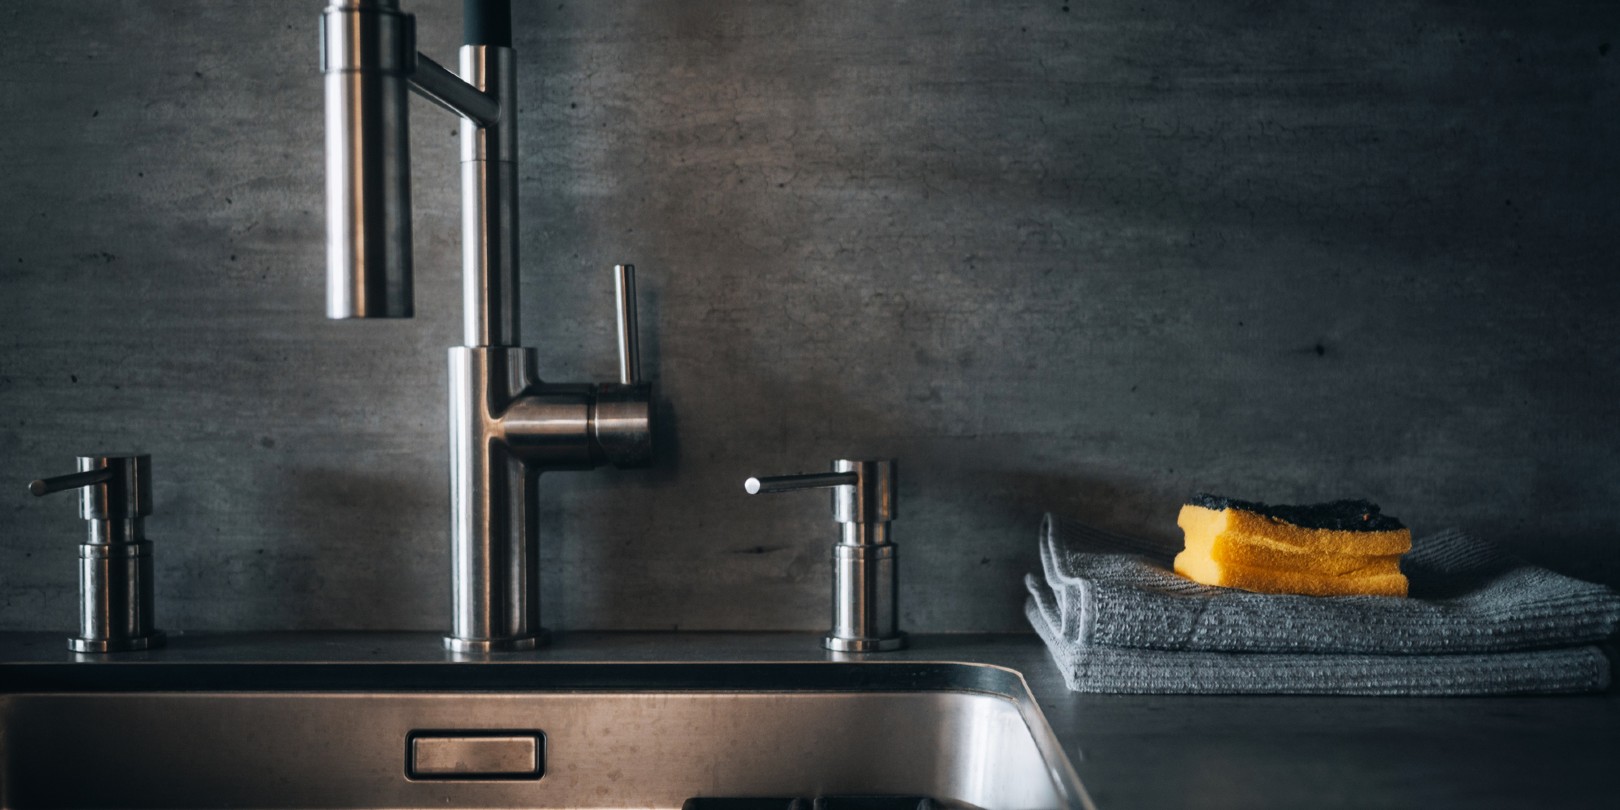 This is how often you should really be changing your kitchen sponge